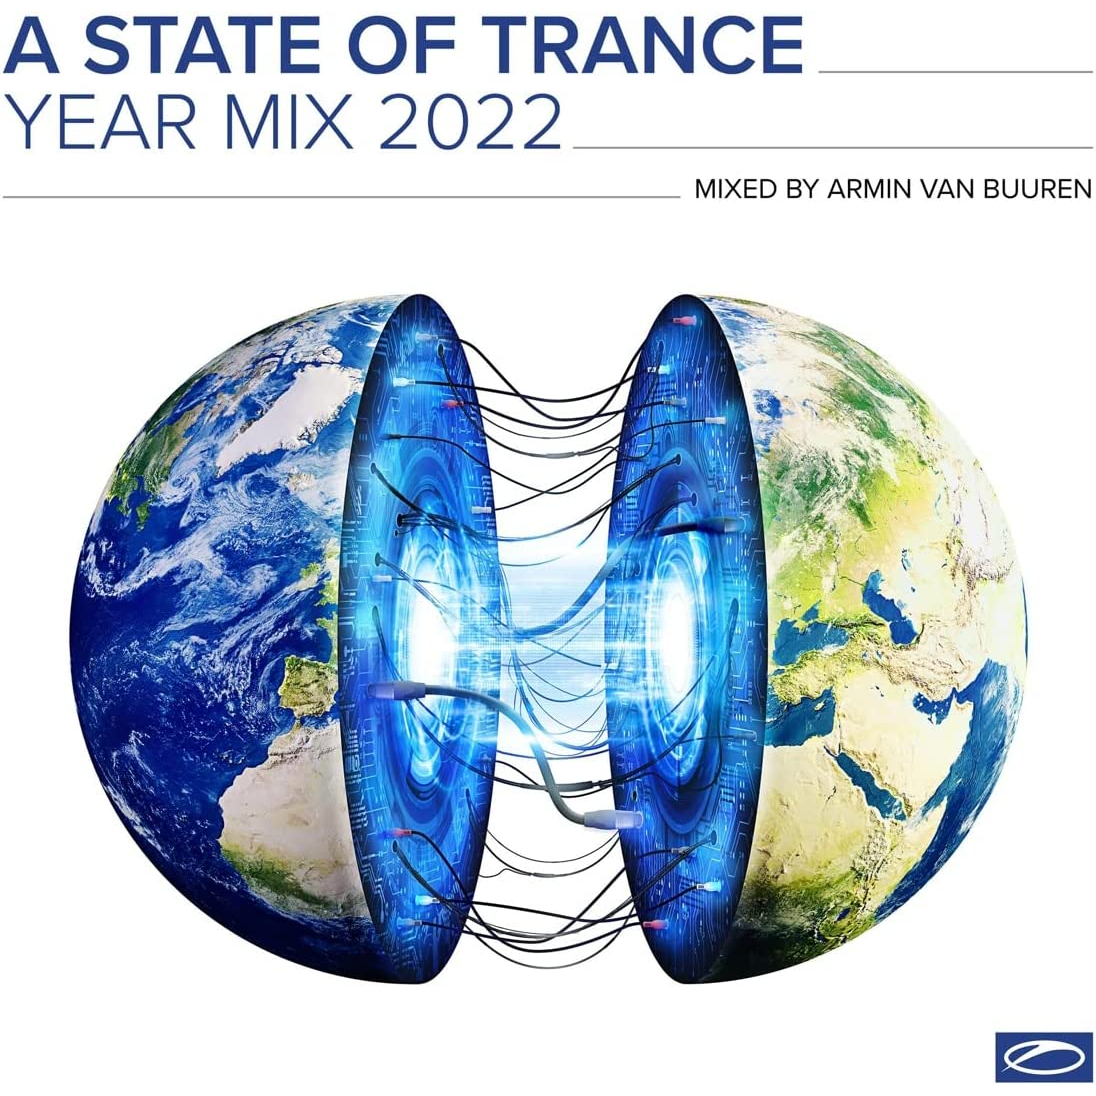 A STATE OF TRANCE YEAR MIX 2022